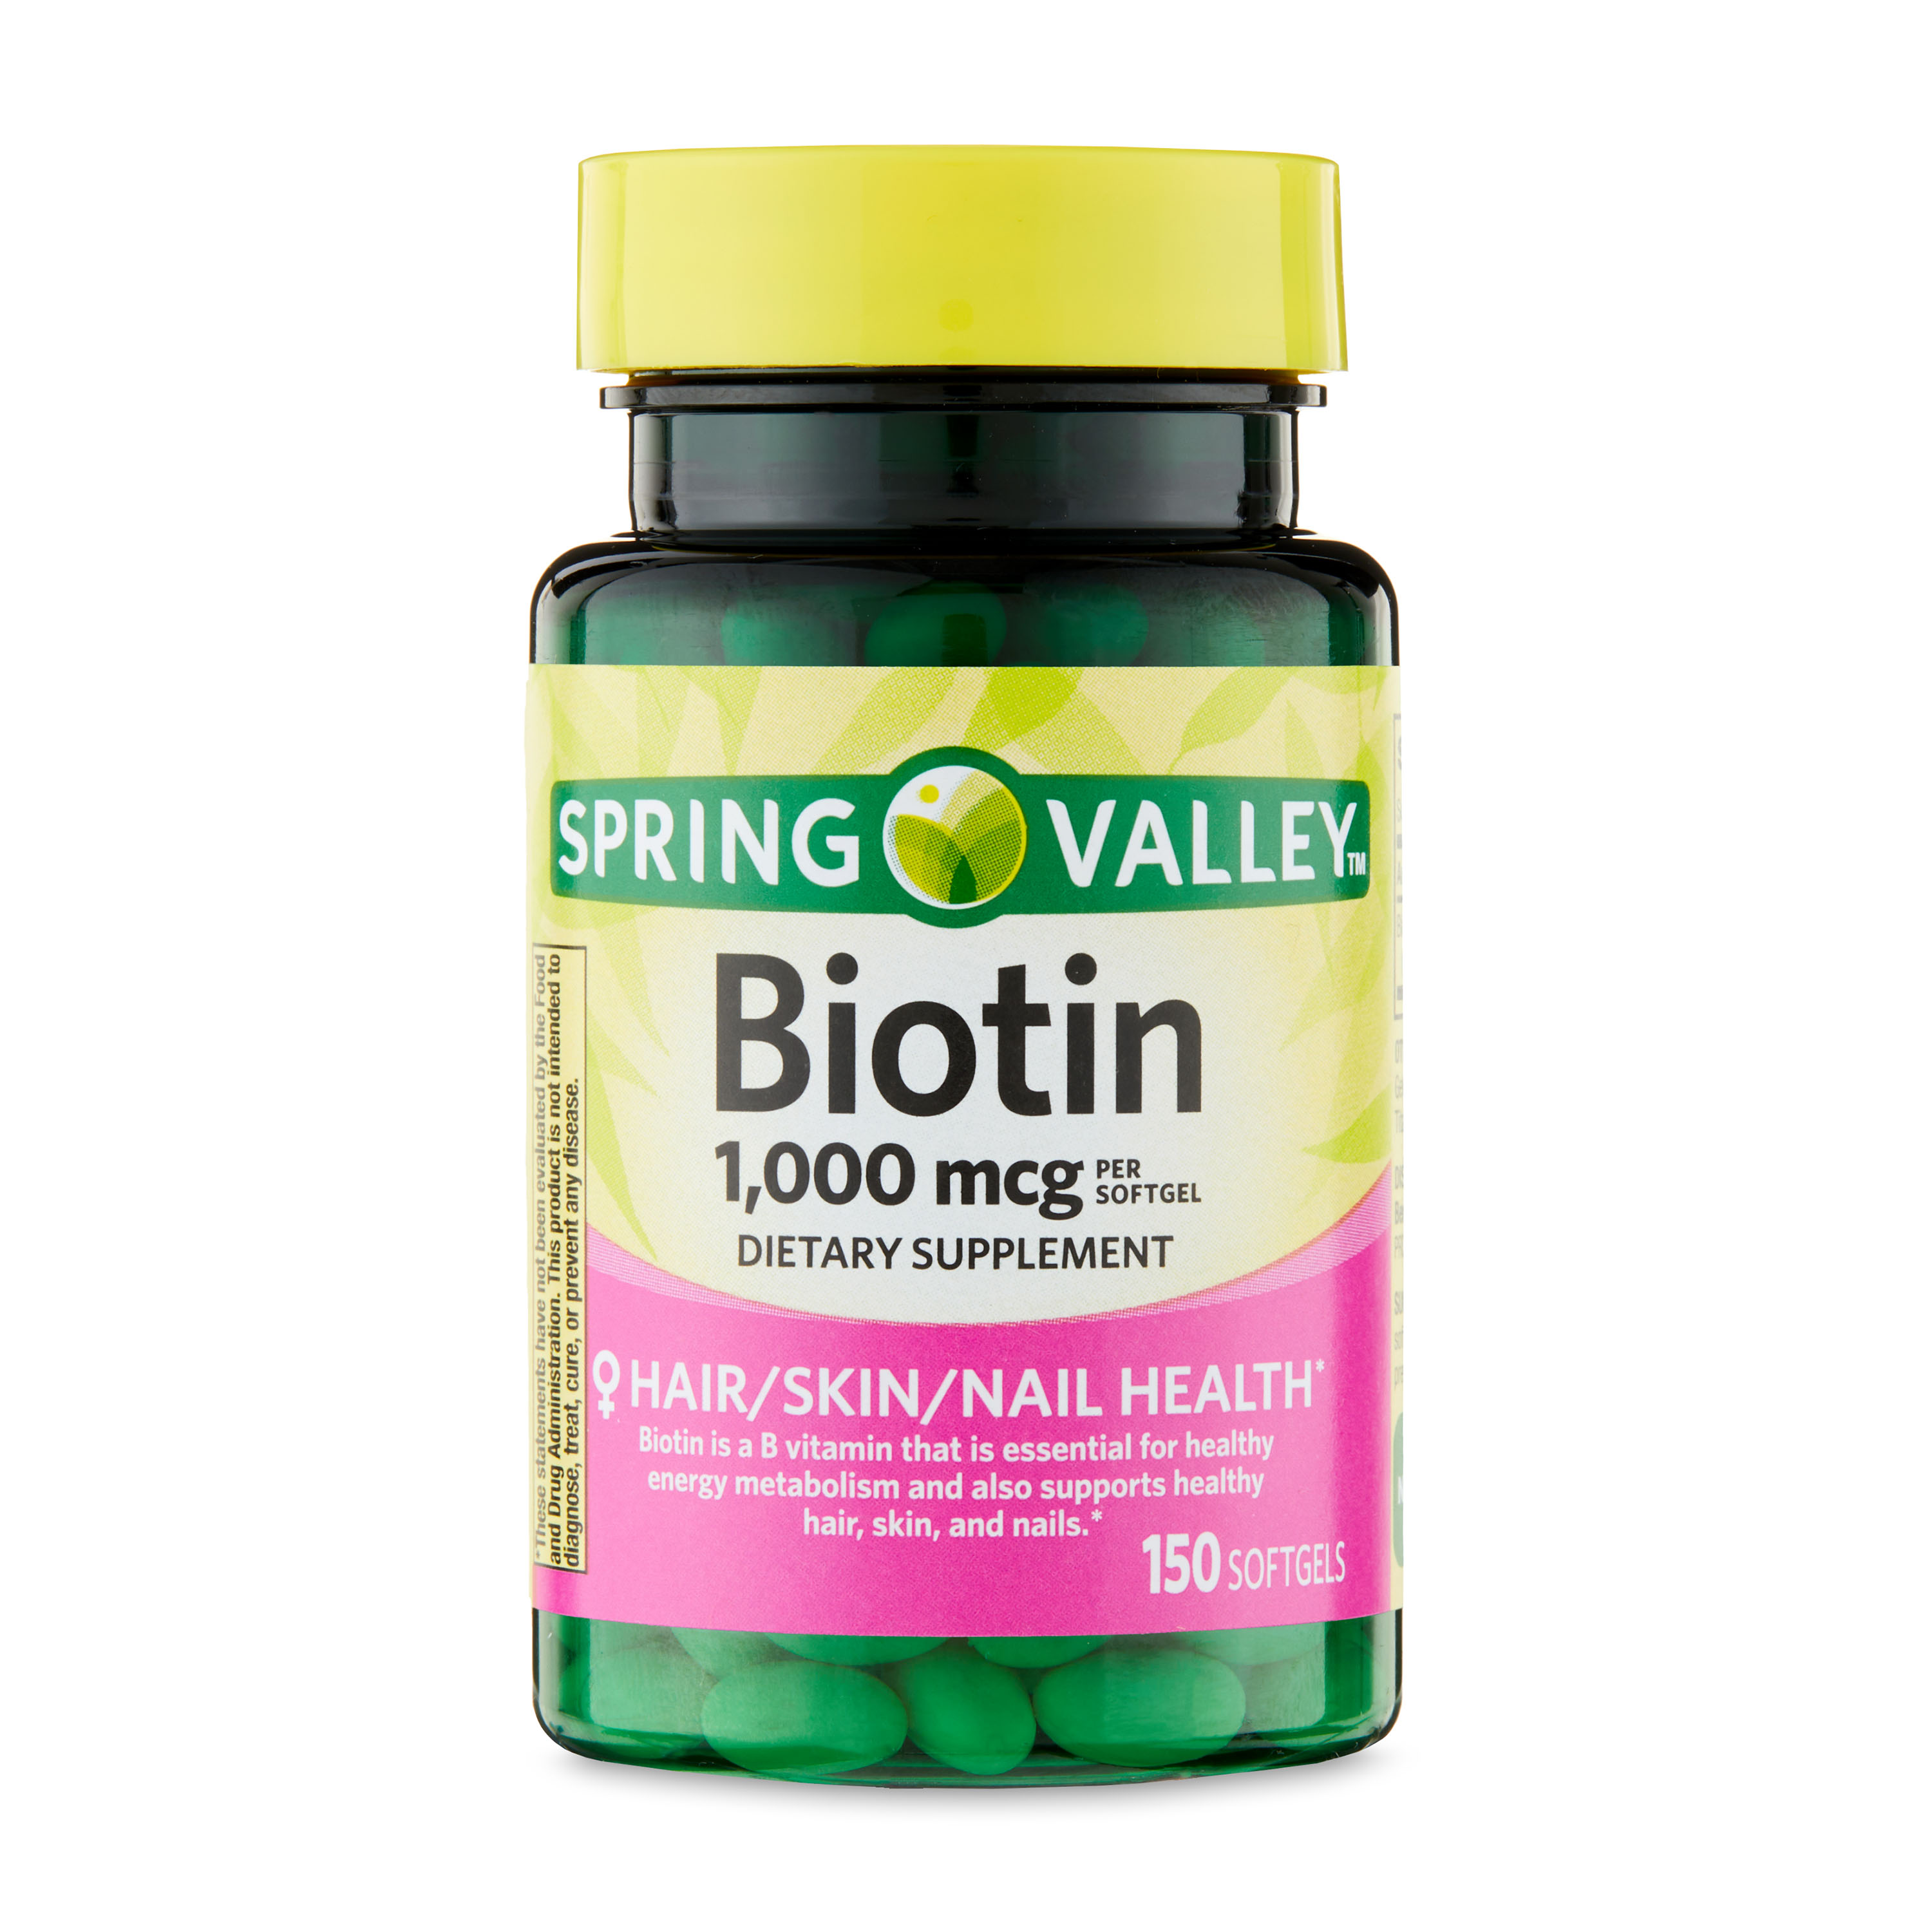 Spring Valley Biotin Softgels, 1000mcg, 150 Count - image 1 of 10